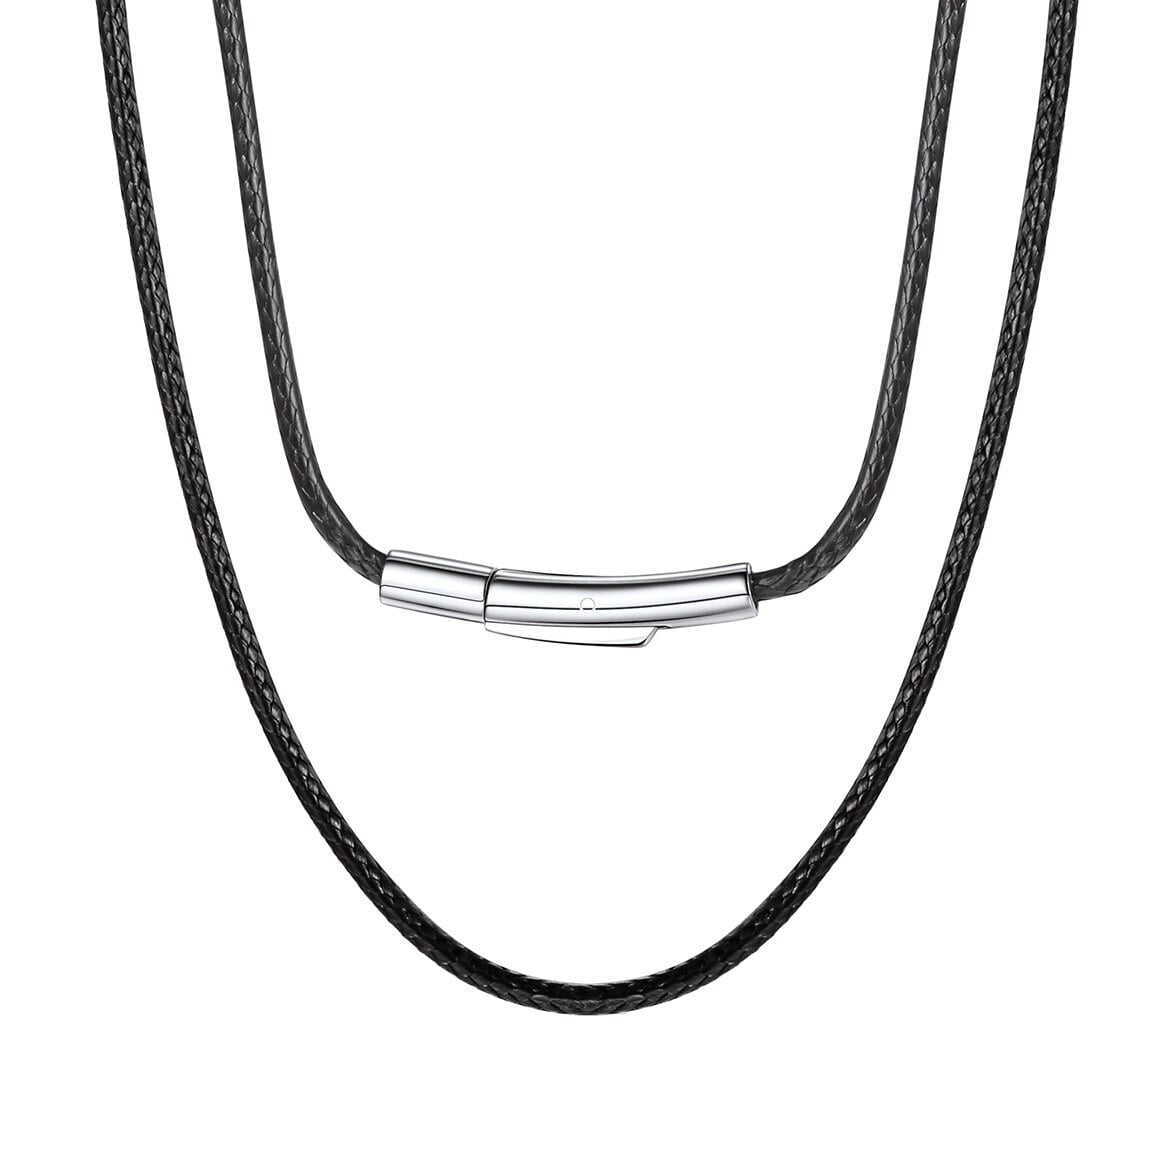 Amazon.com: Black Stainless Steel 4mm Twist Rope Chain Necklace, 22